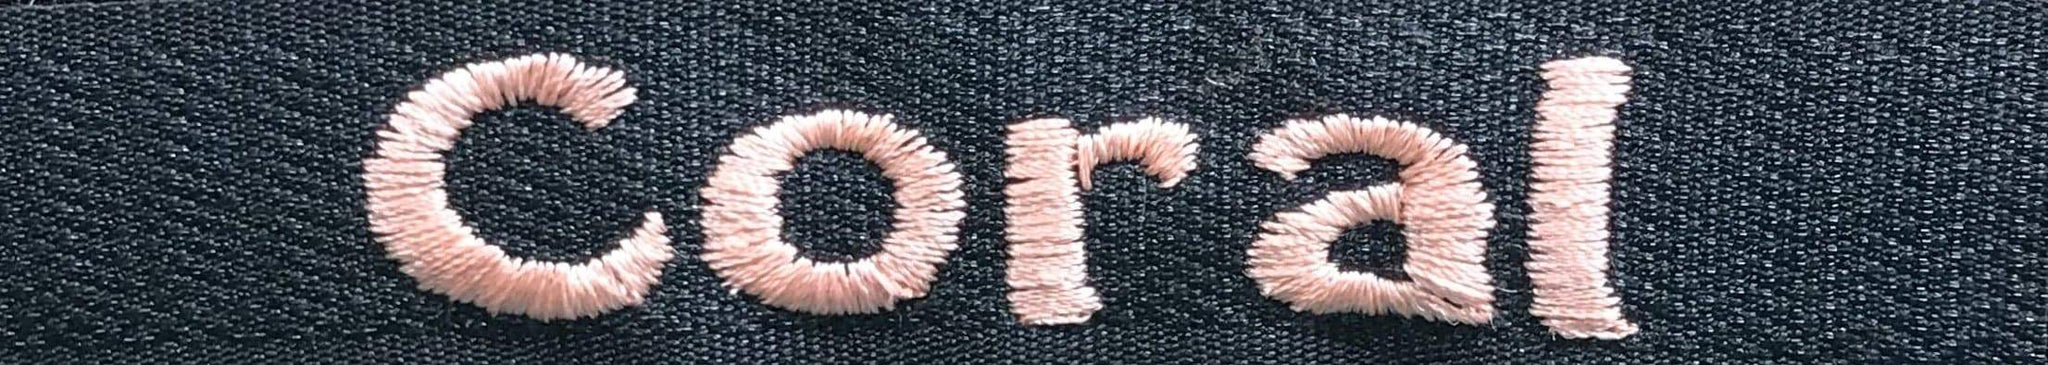 coral embroidery sample